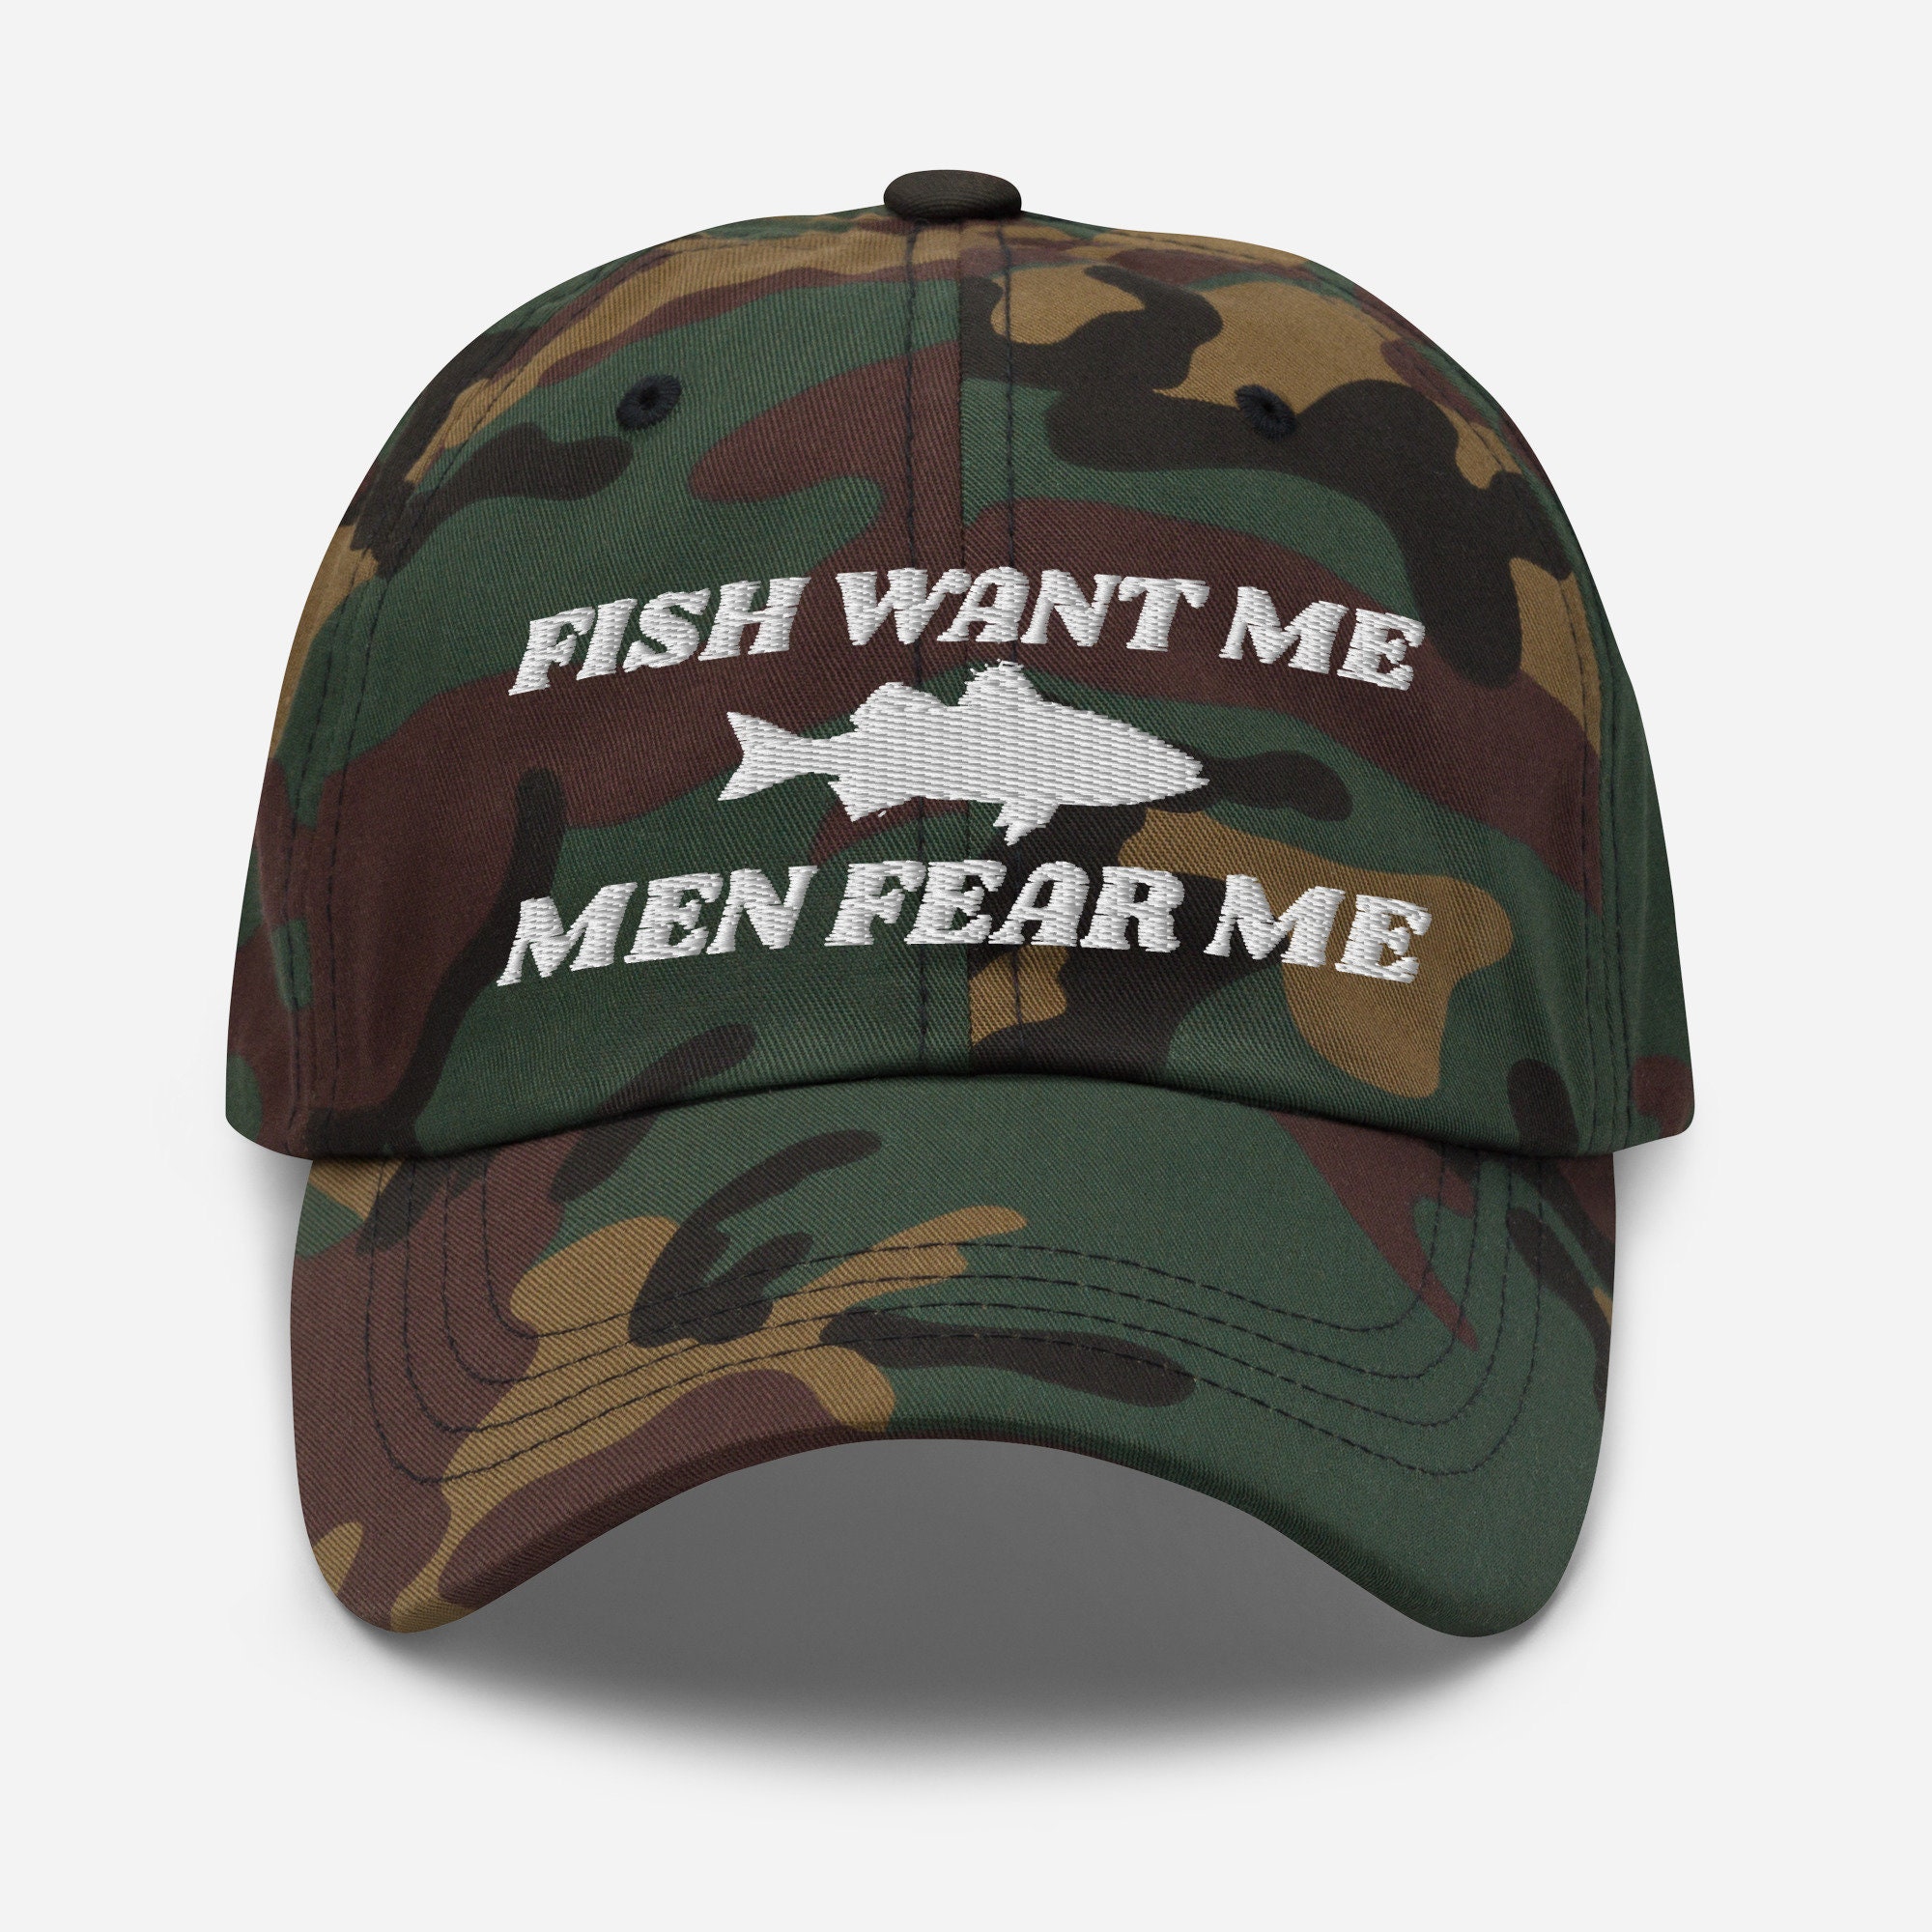 GOAUS Fishing Gifts for Men, Funny Hat and Socks for Him, Father